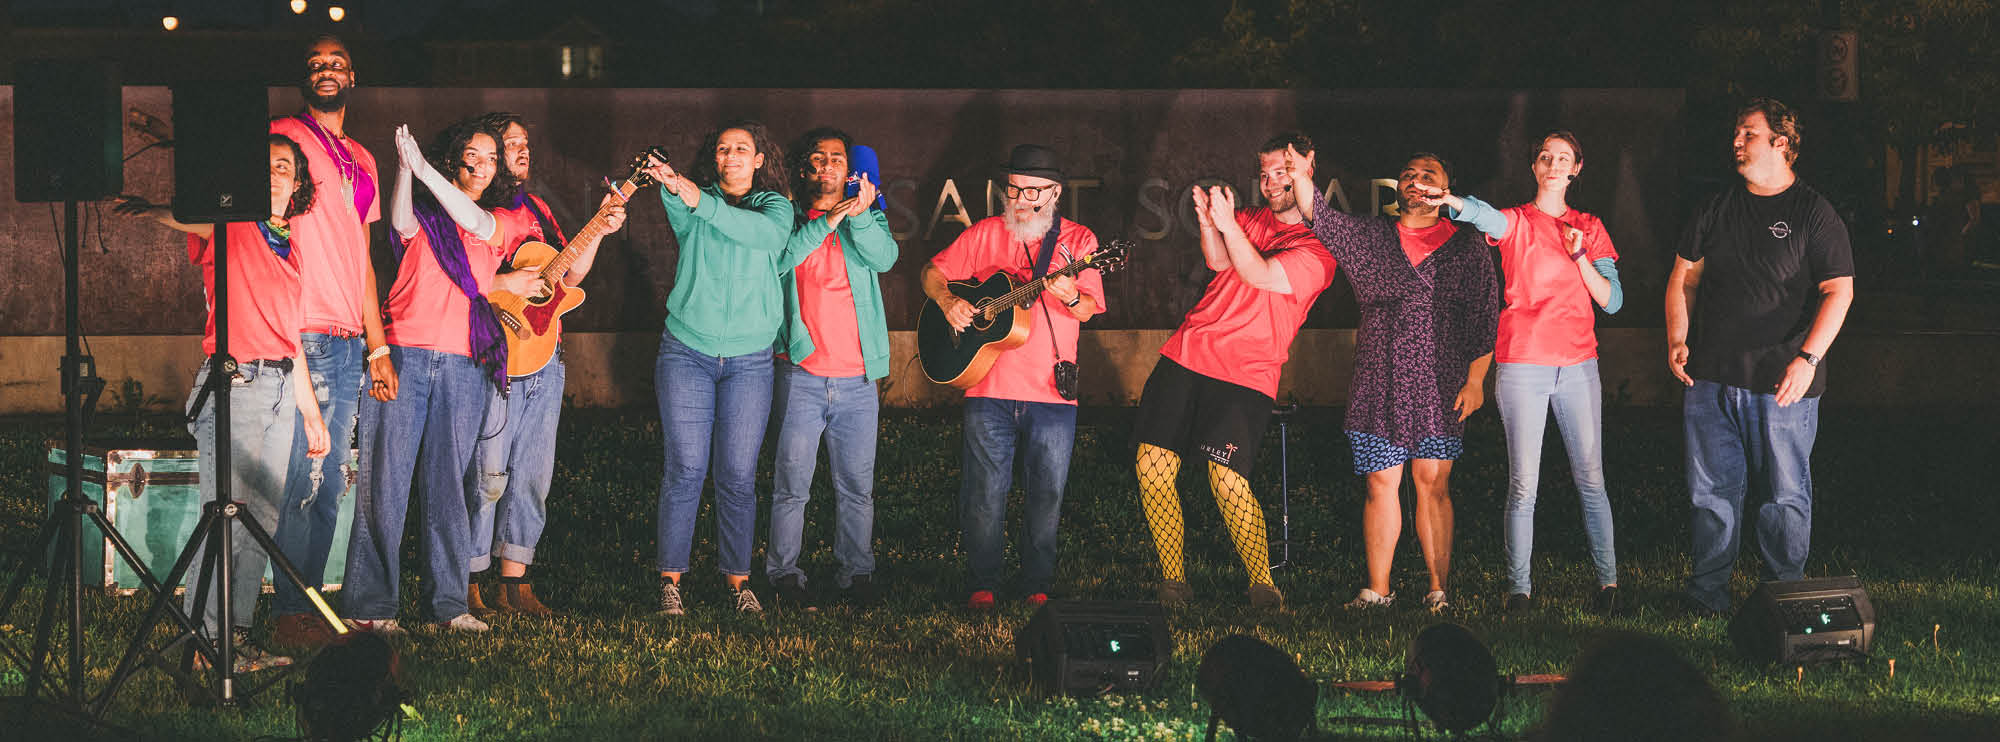 Group of diverse individuals outdoors at night, singing and playing guitar, dressed in red shirts and colorful attire, illuminated by front lights. 